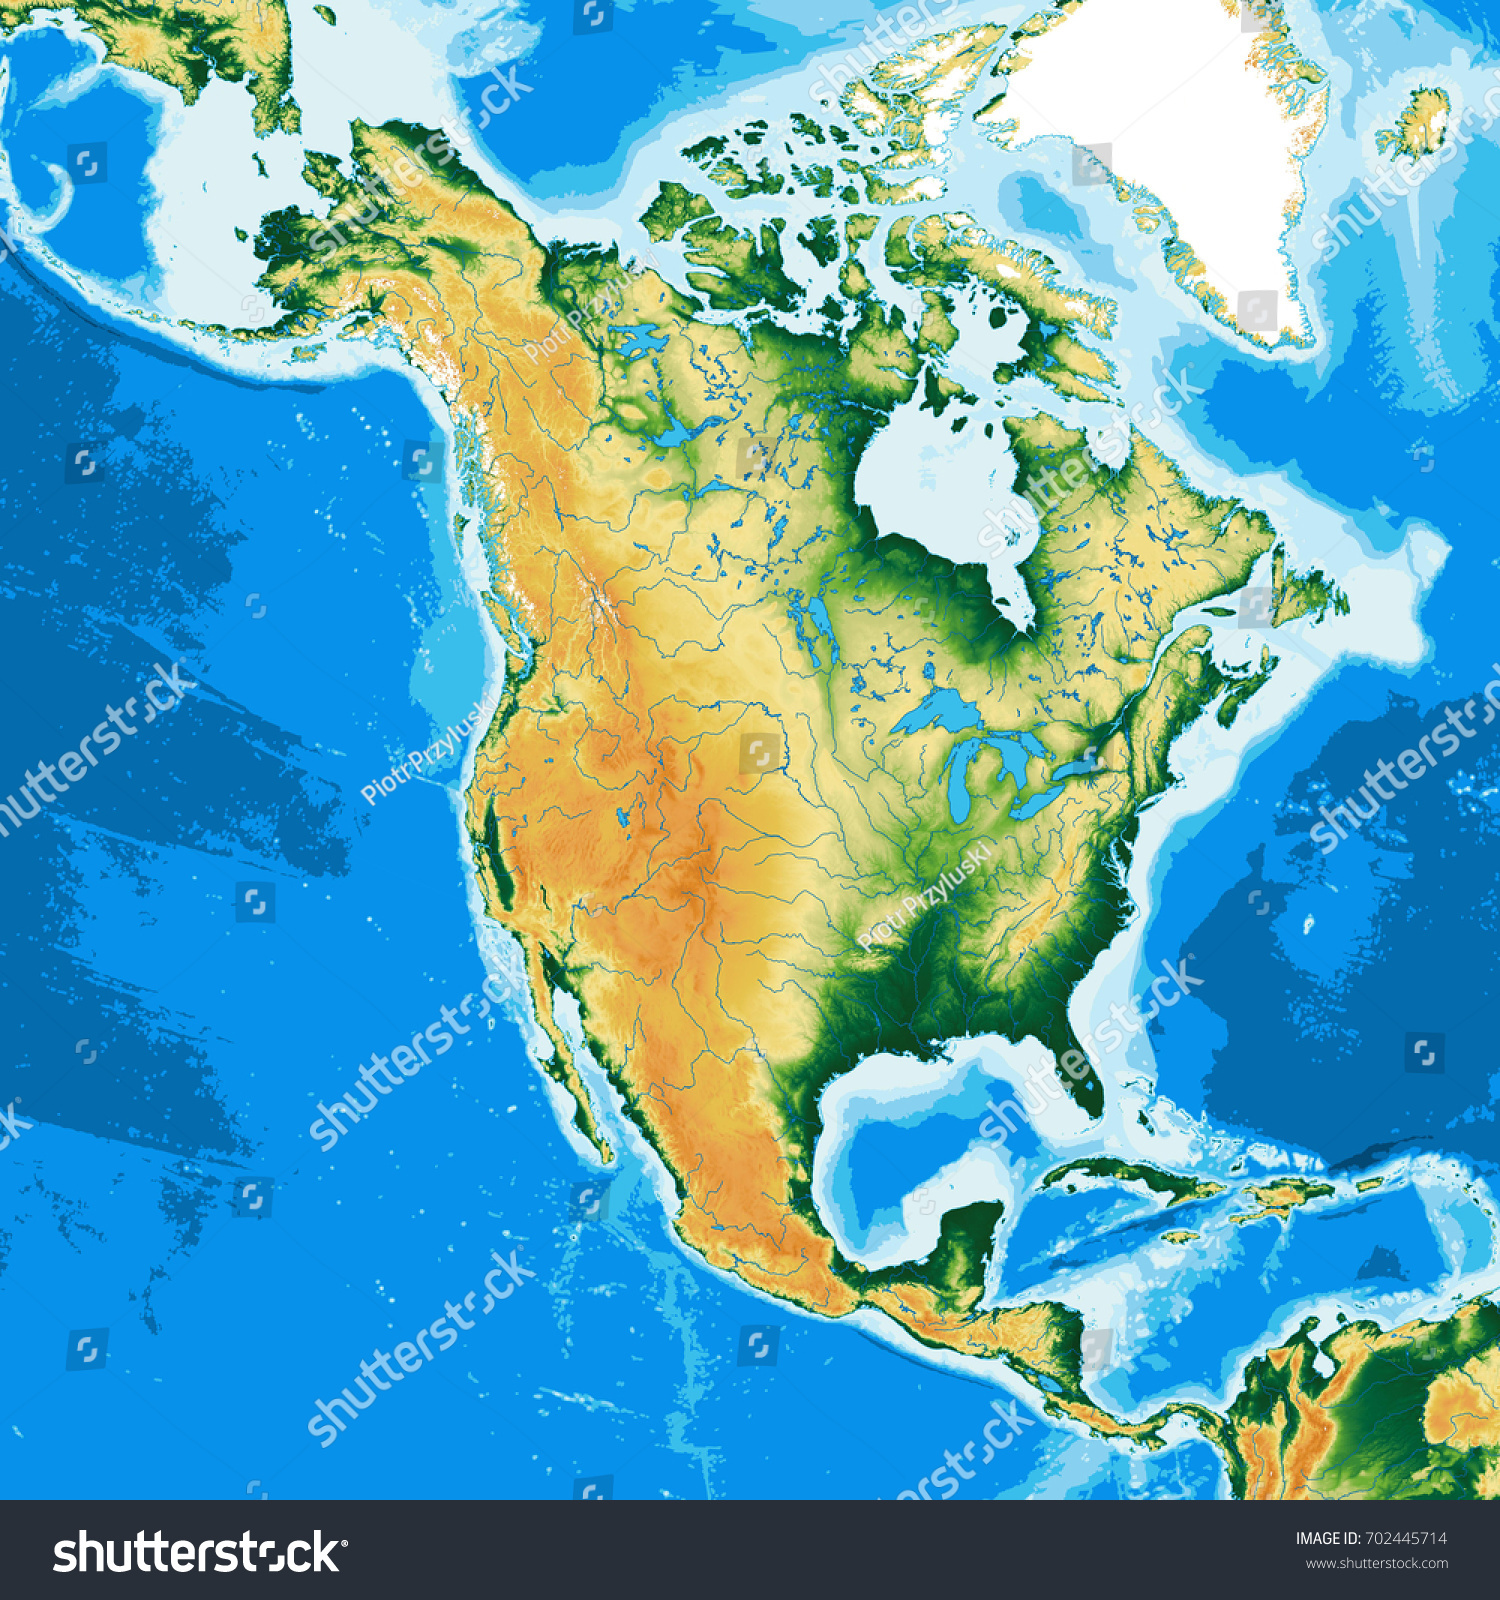 Ilustrasi Stok North America Physical Map Elements This 702445714 Shutterstock 4037